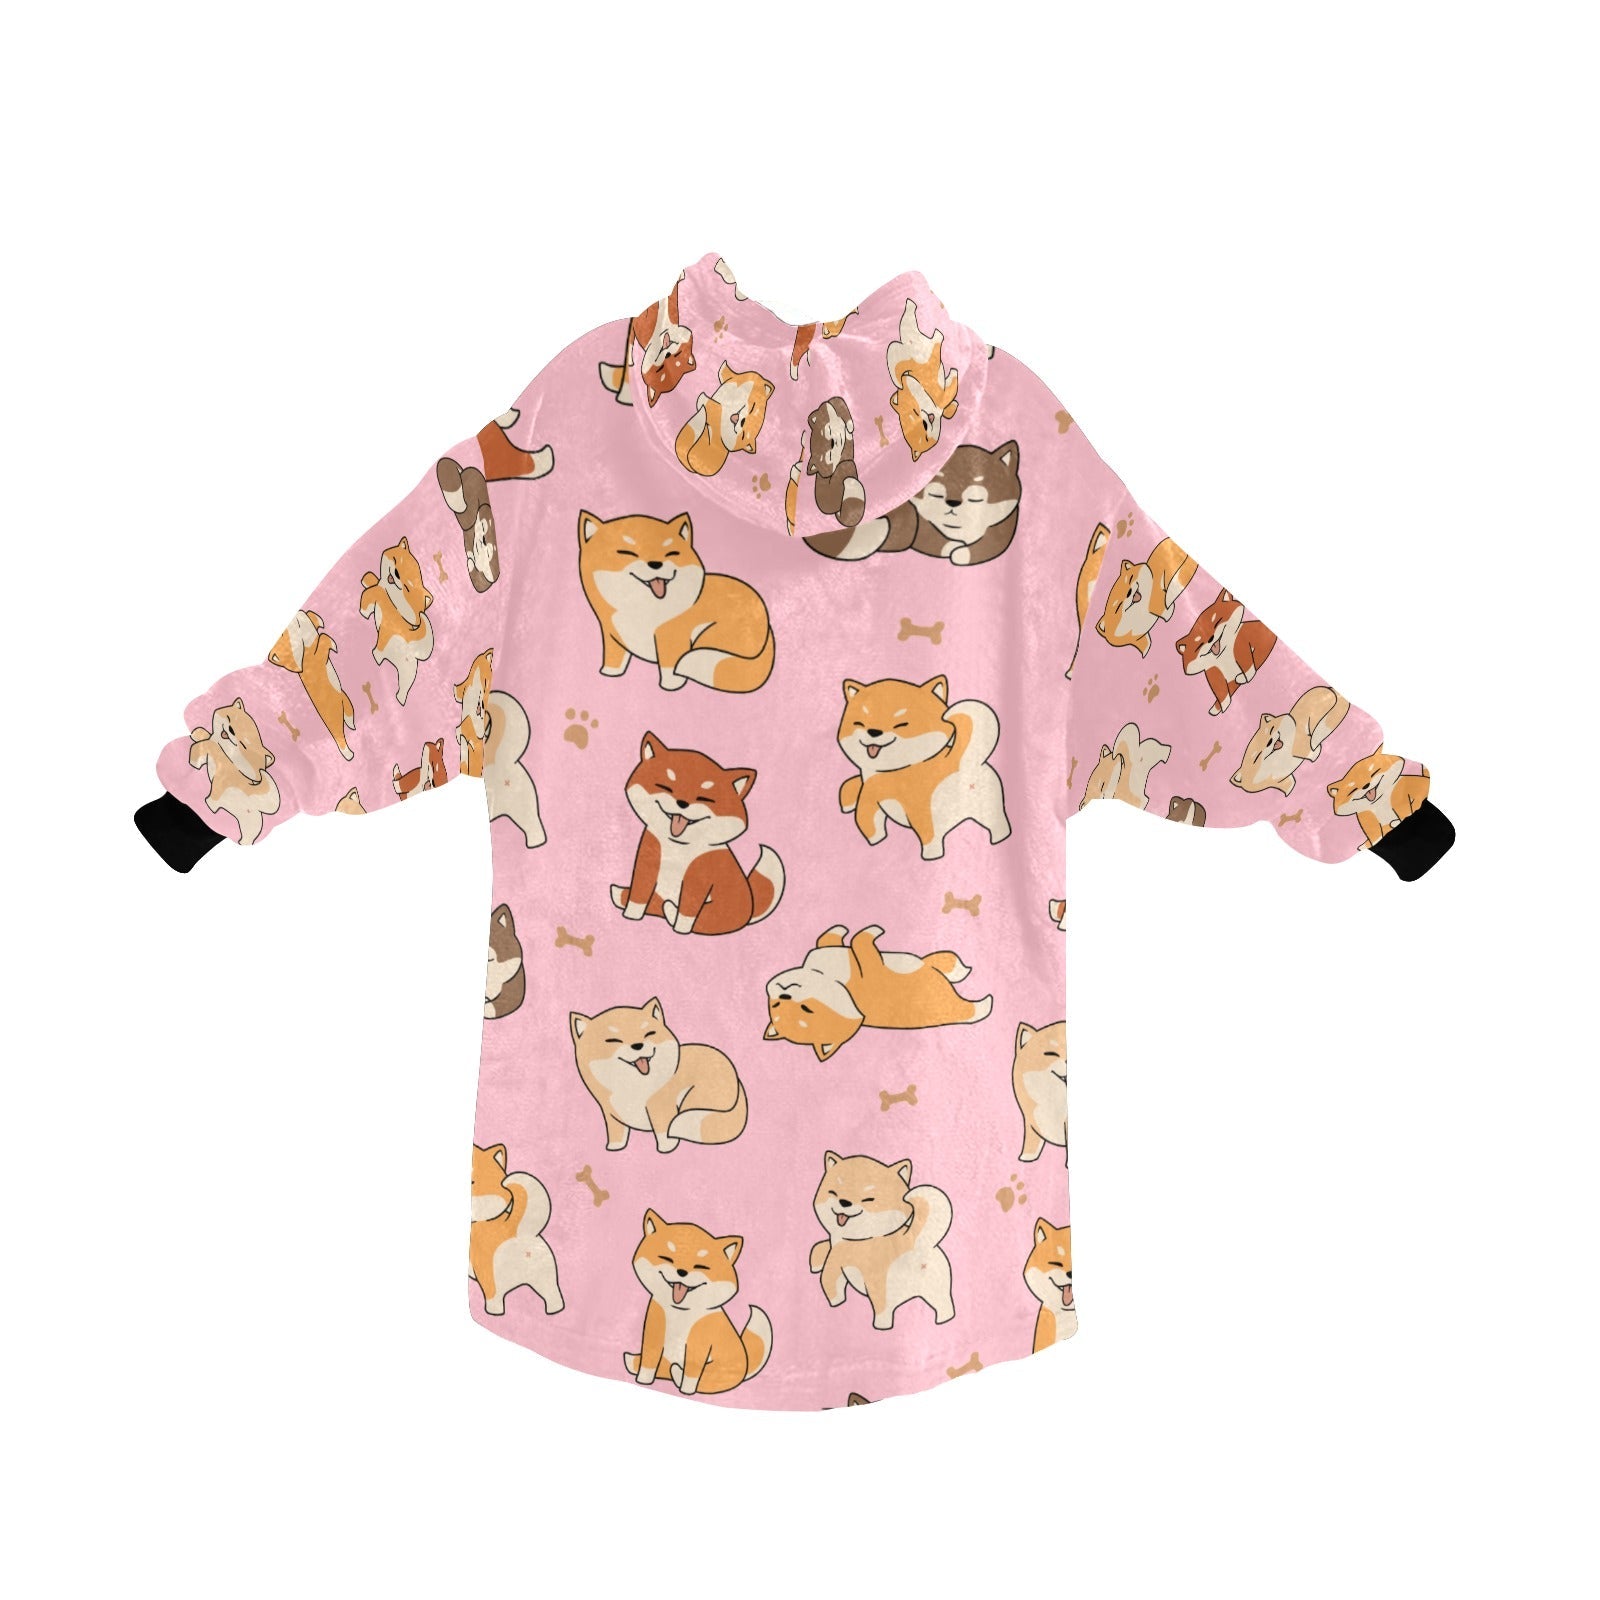 All The Shibas I Blanket Hoodie Love Colors Women - 4 for